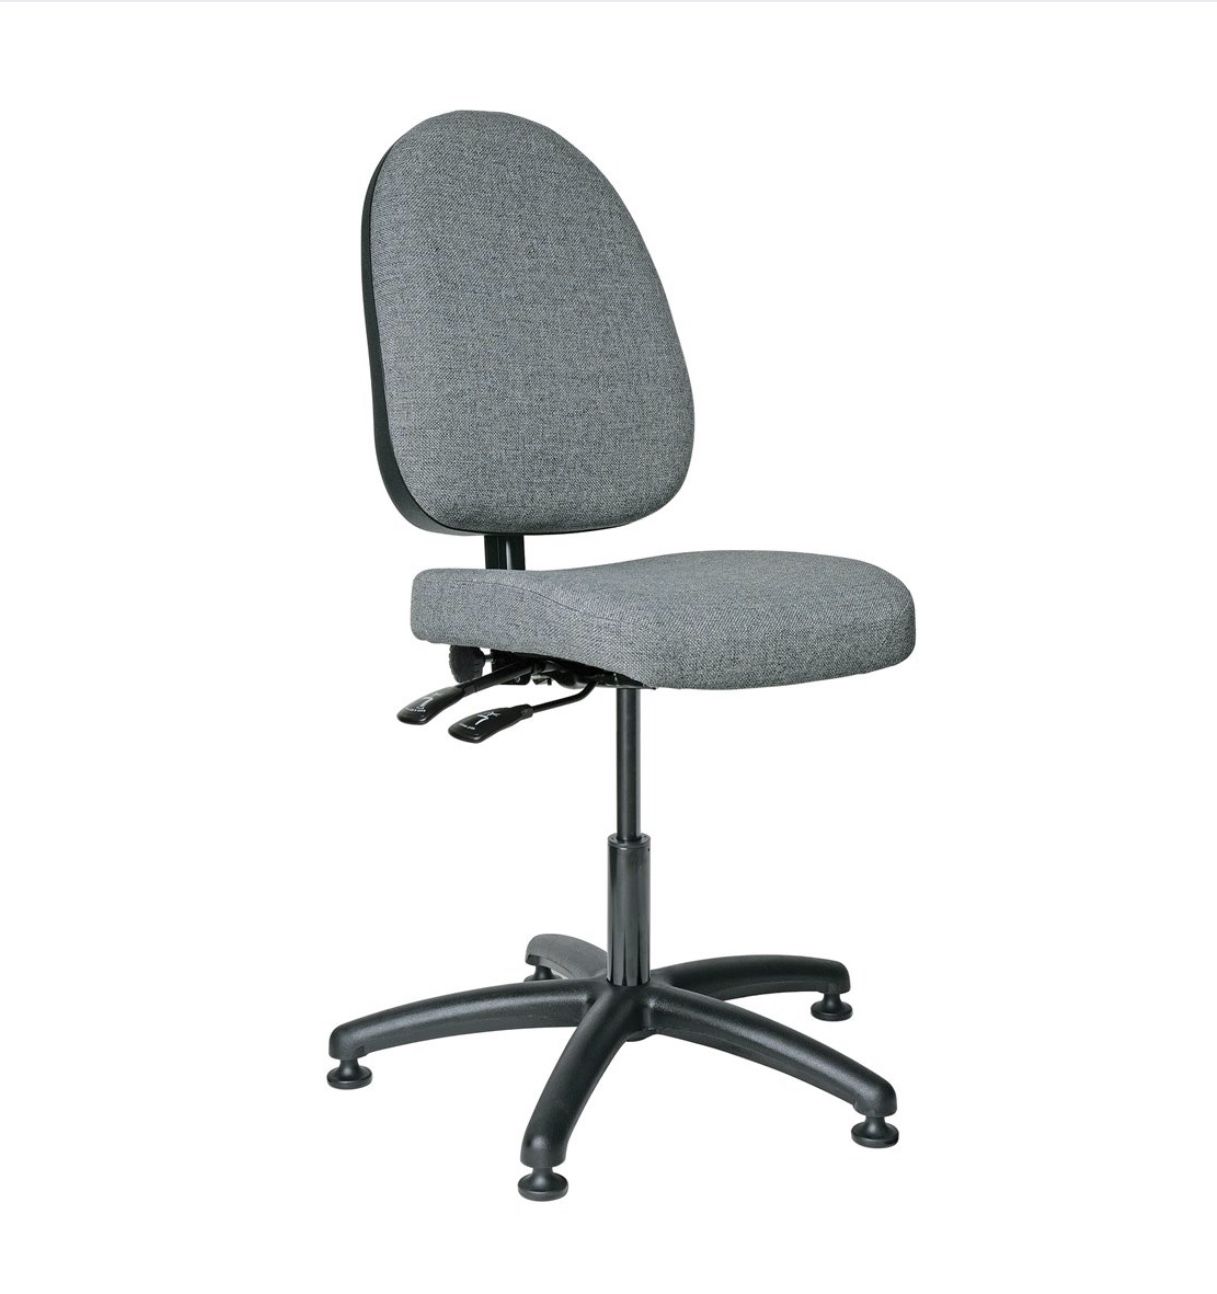 BEVCO Office Chair excellent condition